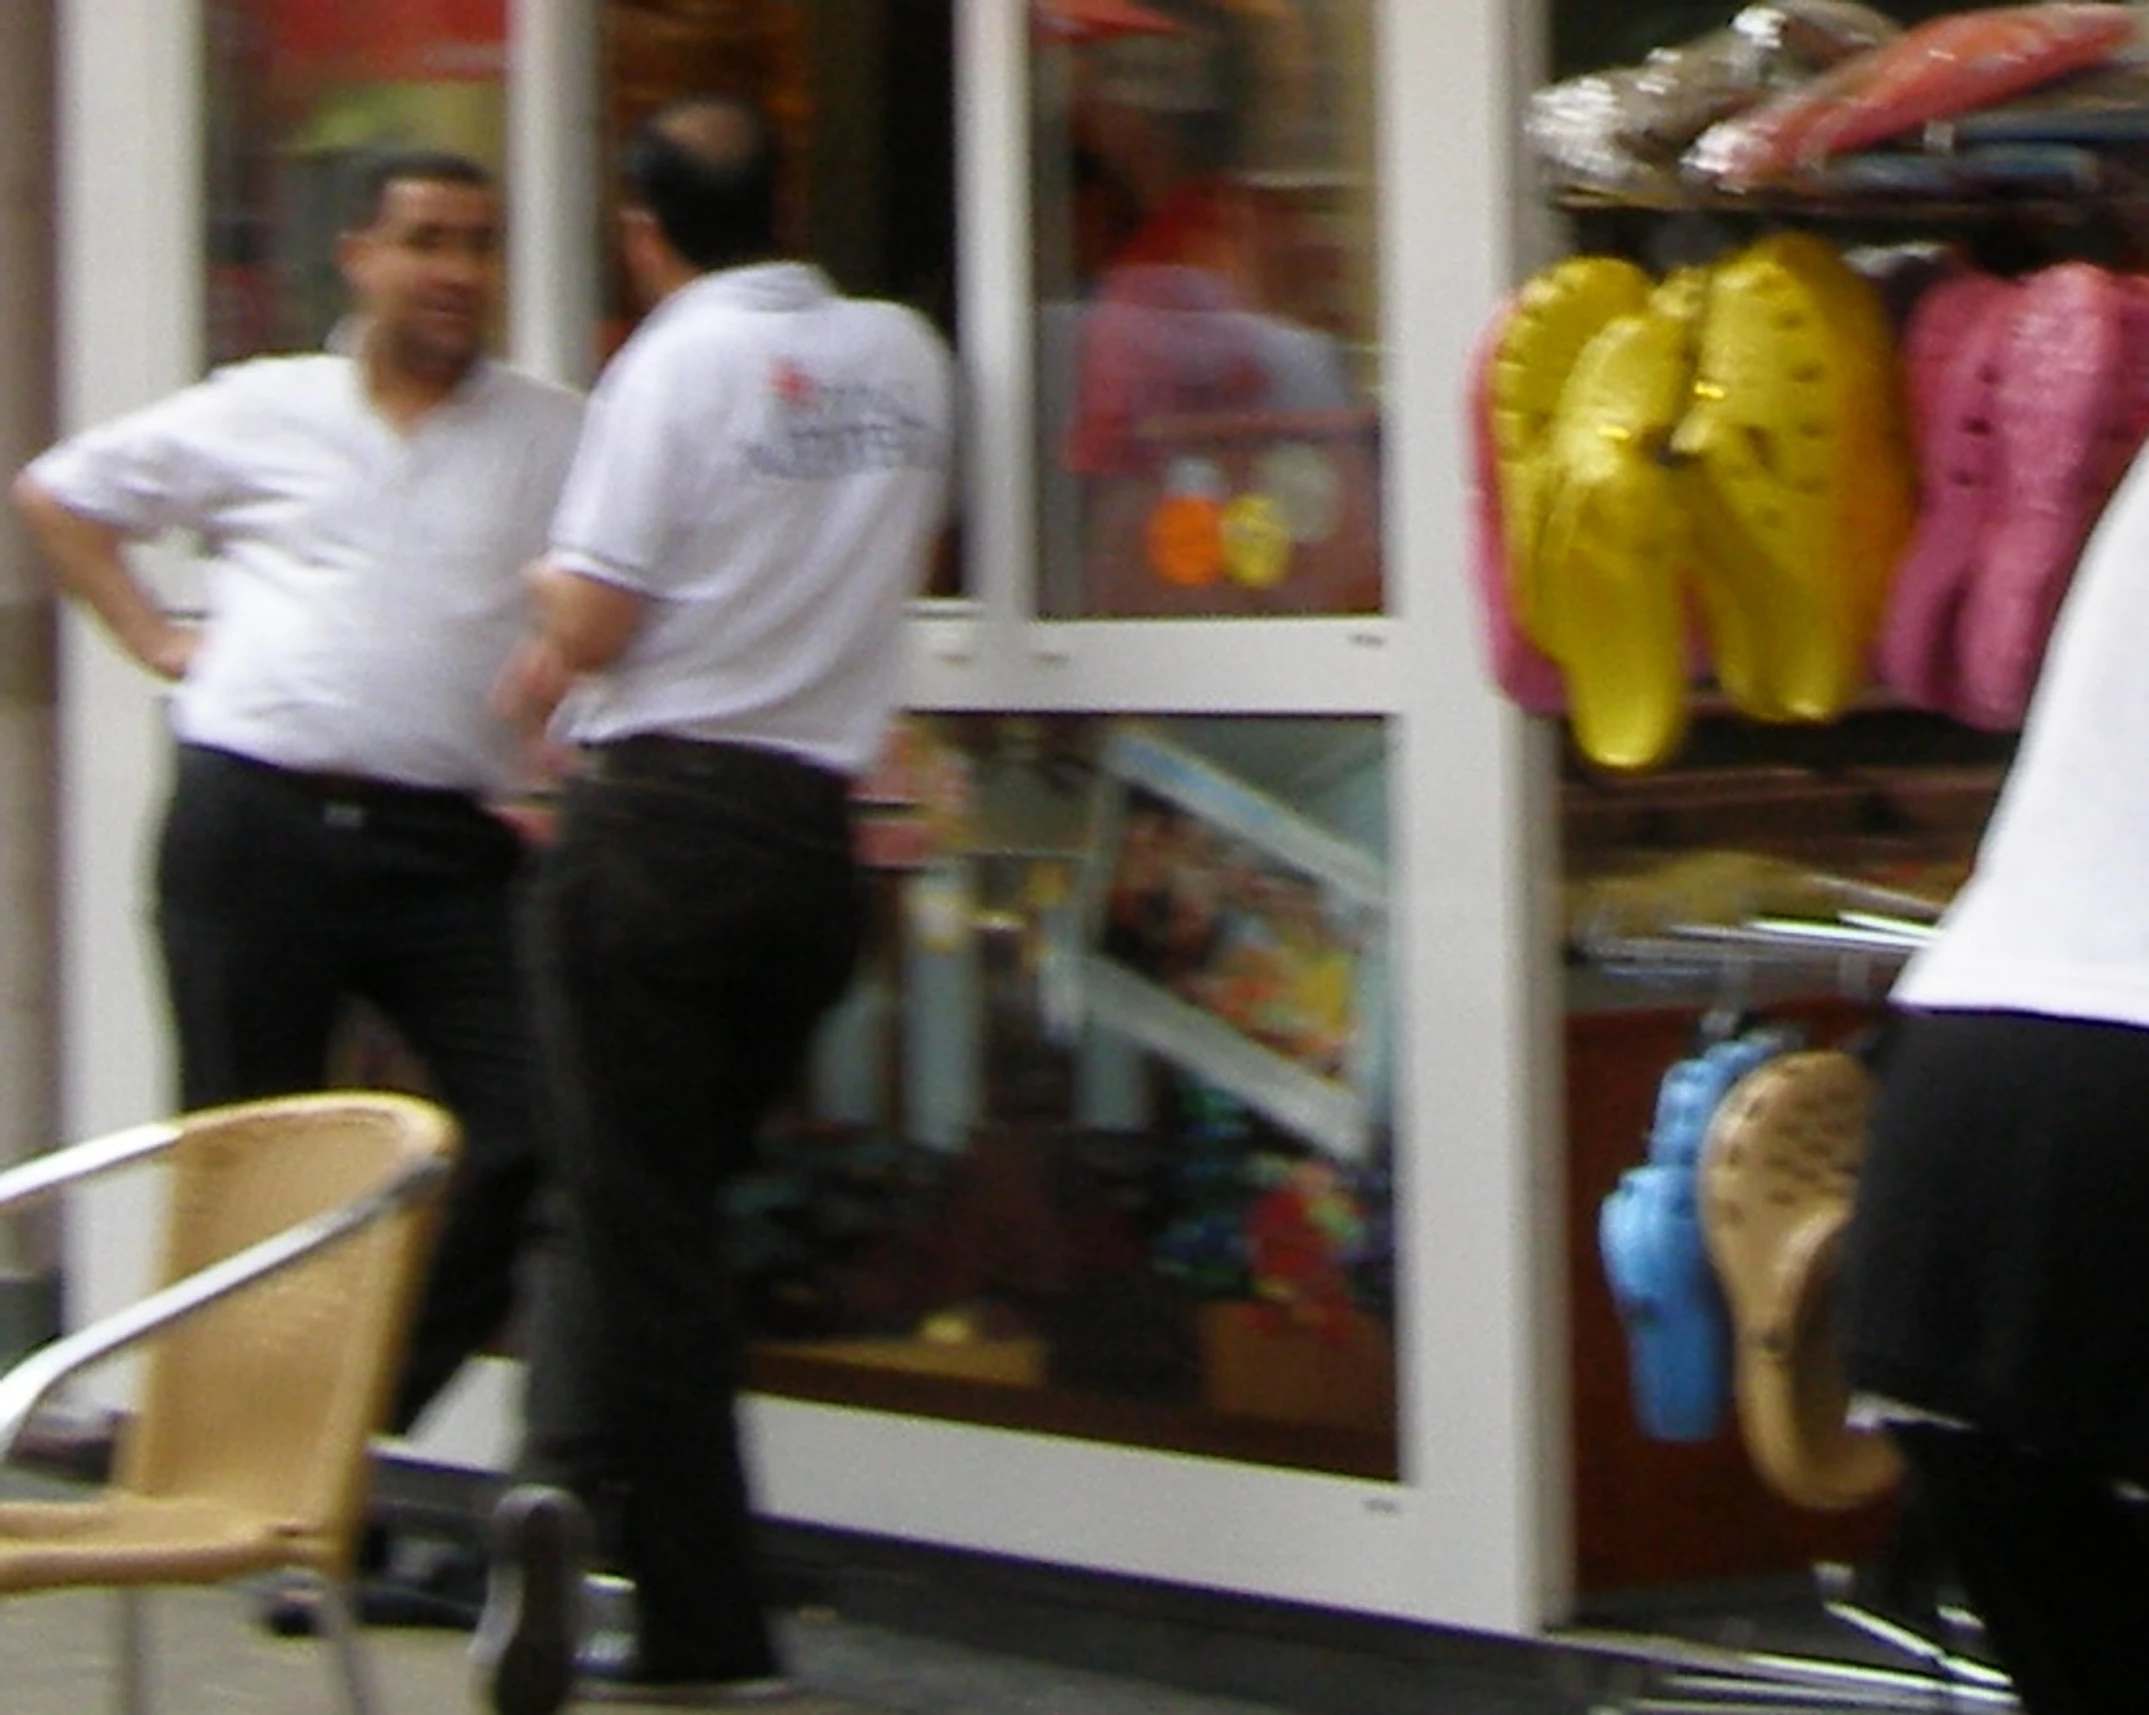 a man stands in front of a shoe store while another person walks past it